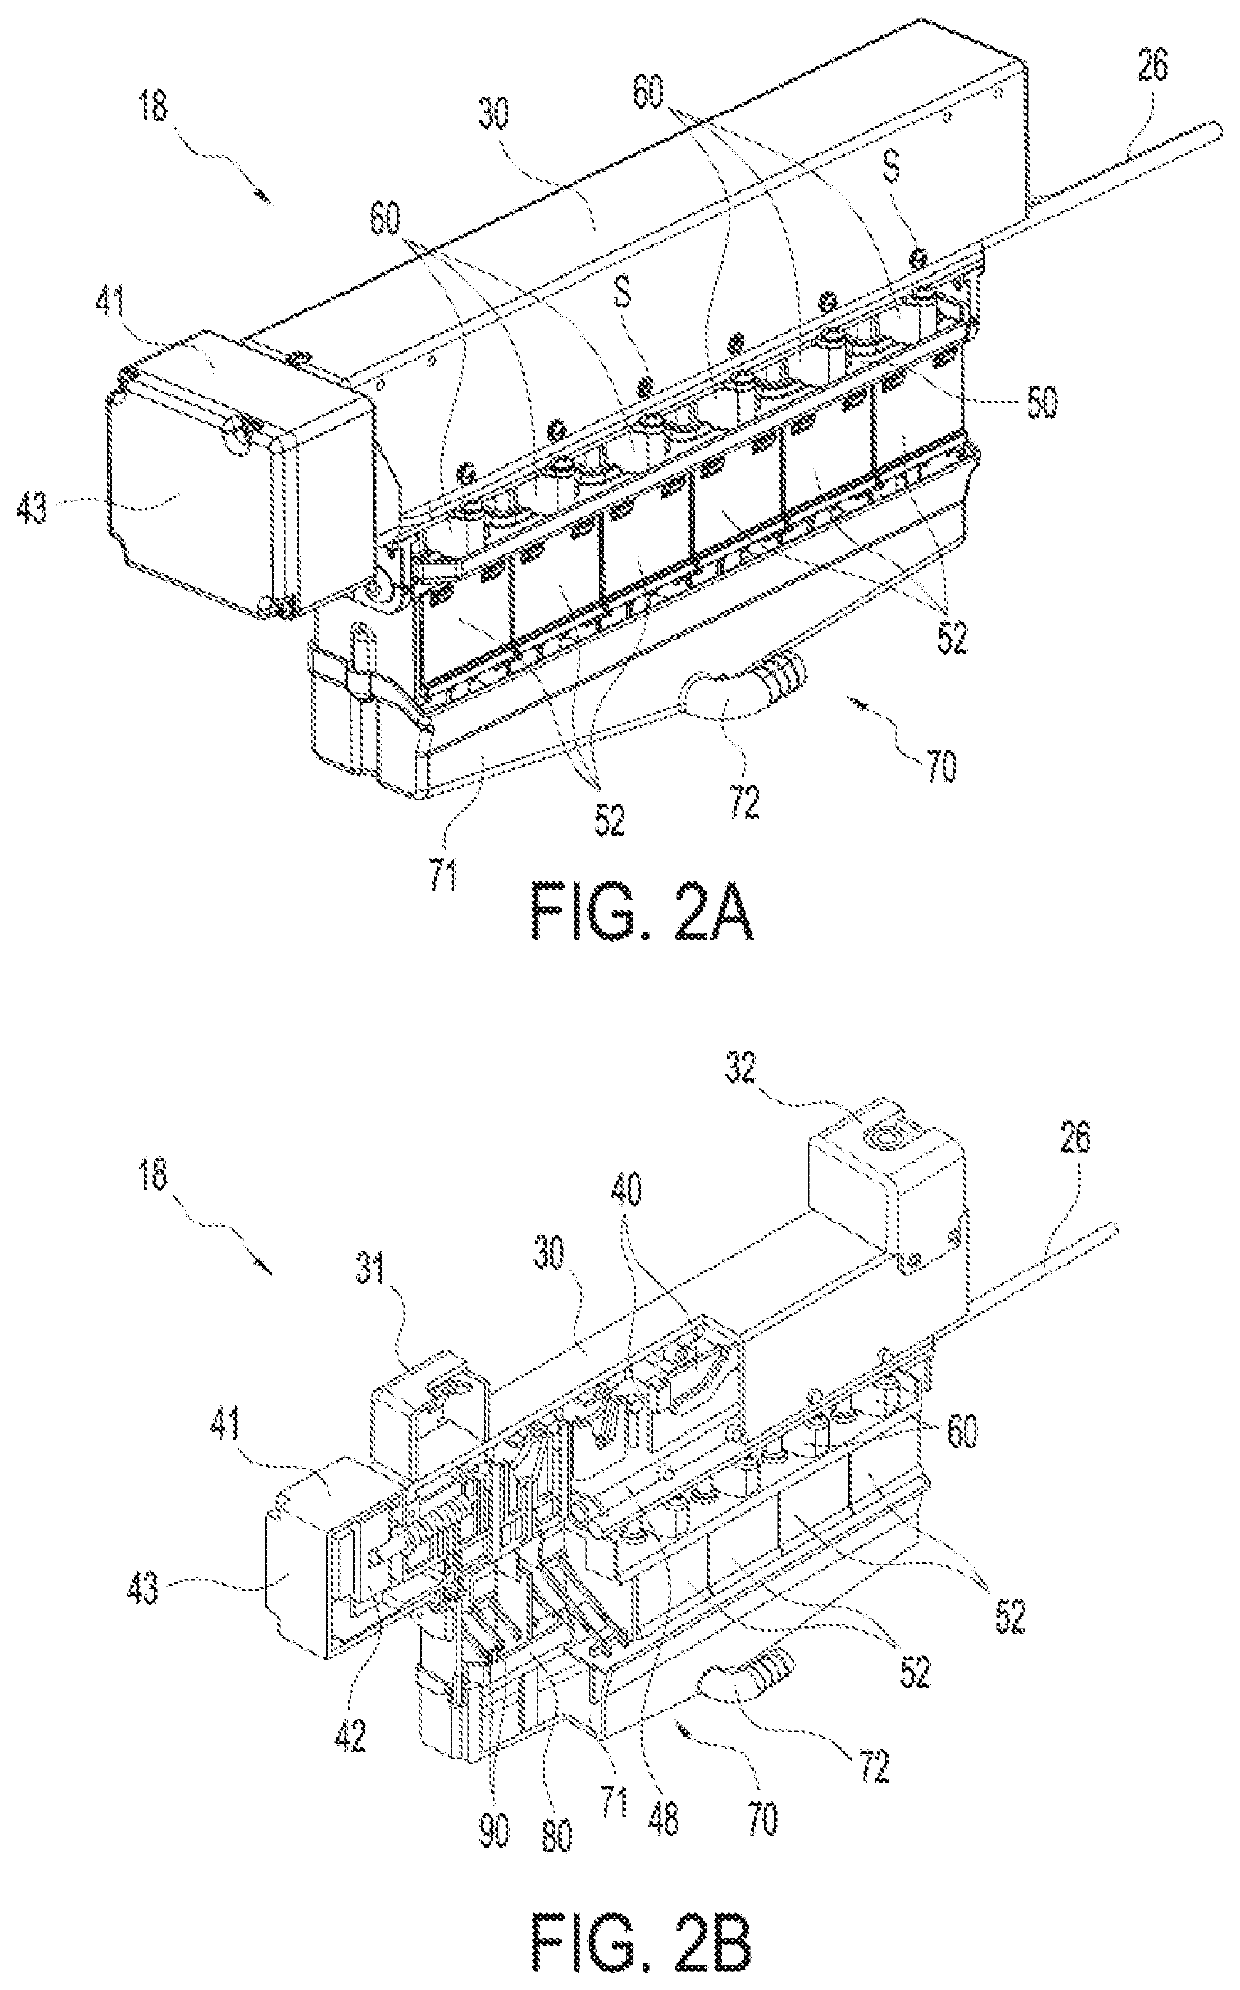 Clear ice maker assembly for production and storage of clear ice within a home refrigerator appliance